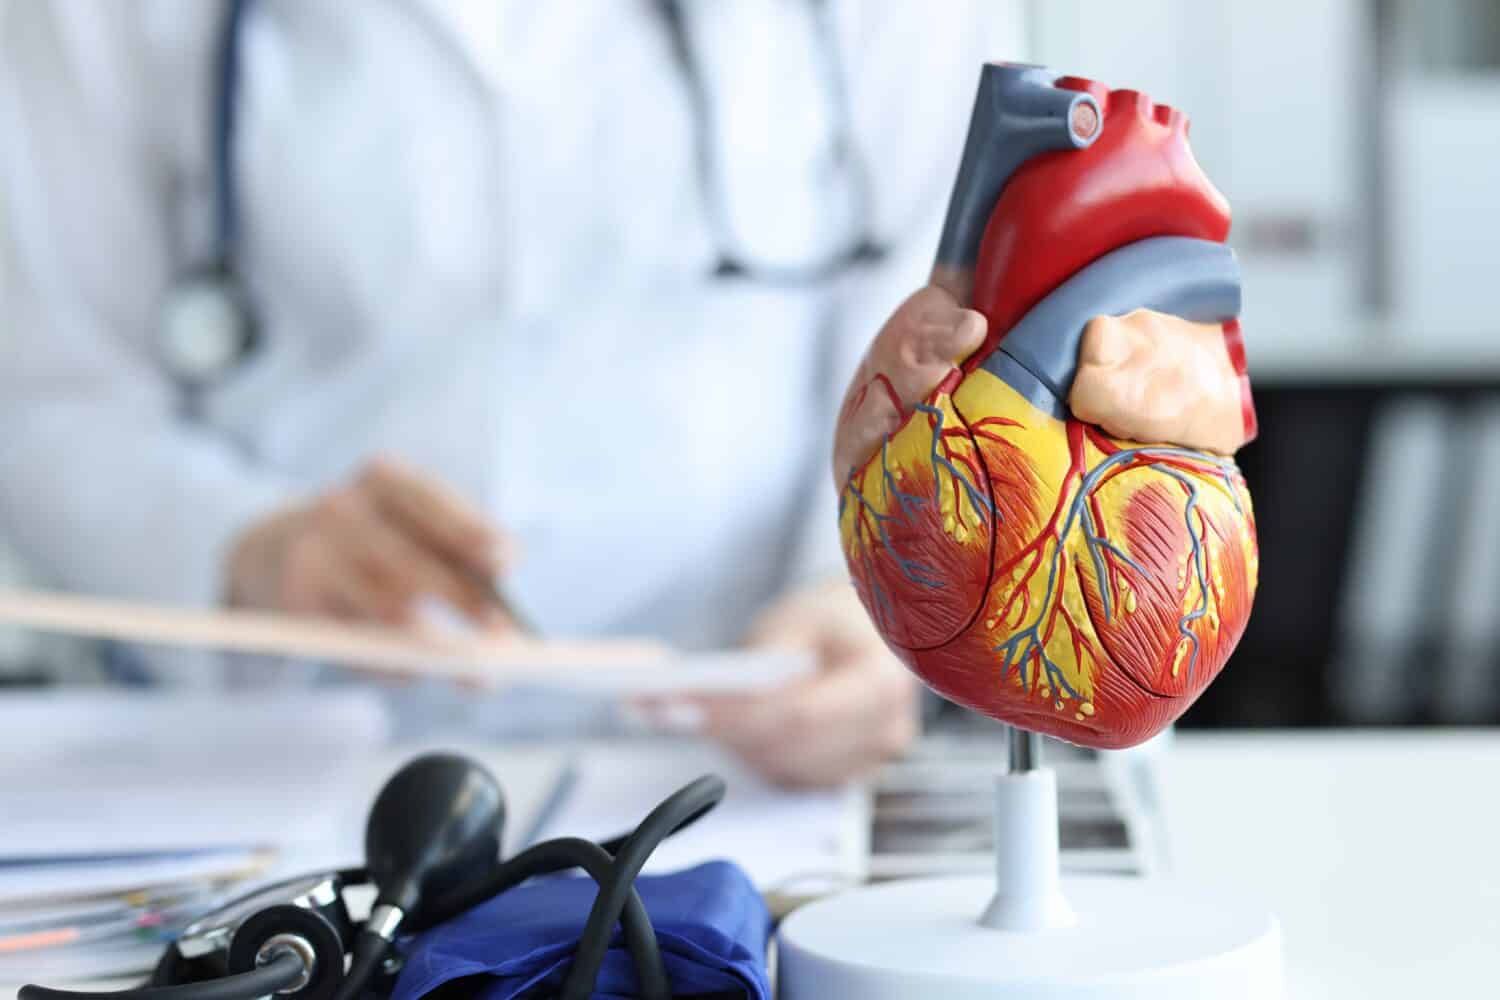 Artificial plastic model of human heart standing against background of cardiologist closeup